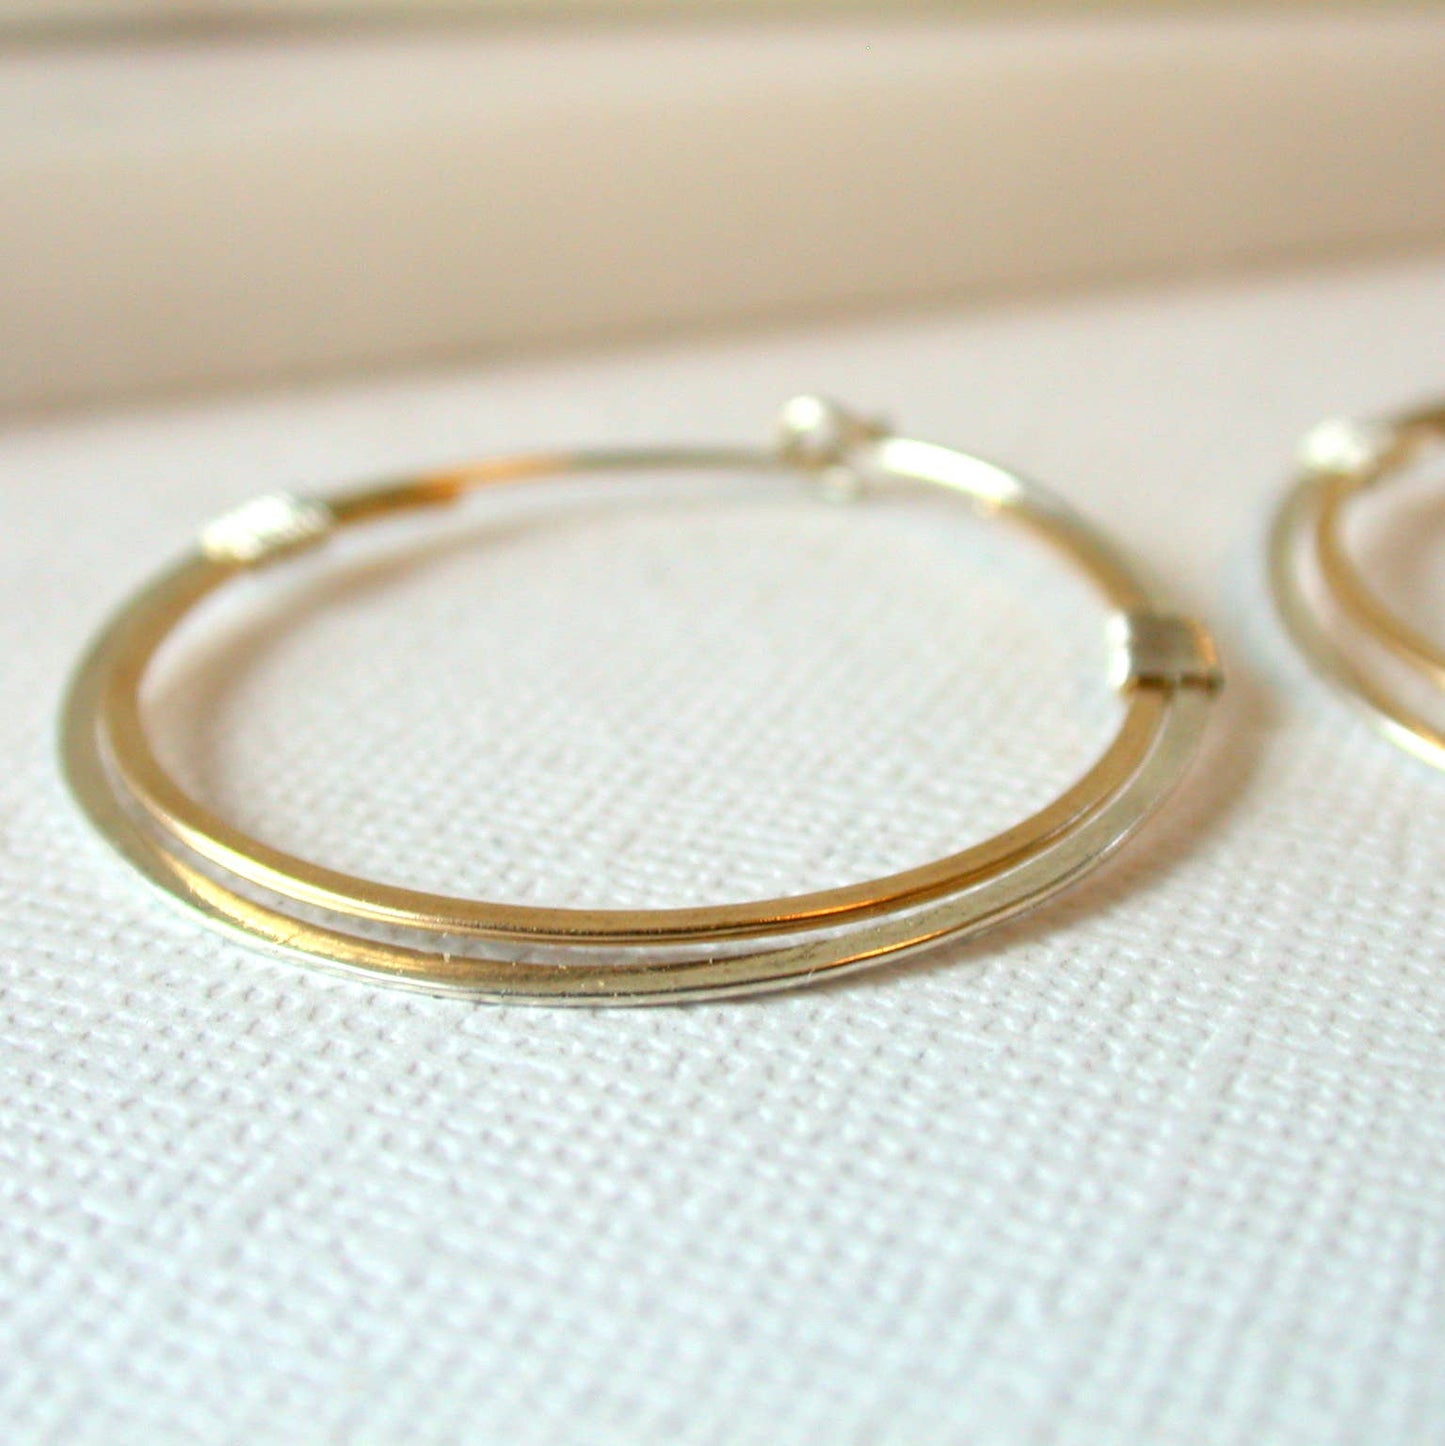 Mixed Metal Double Round Hoops